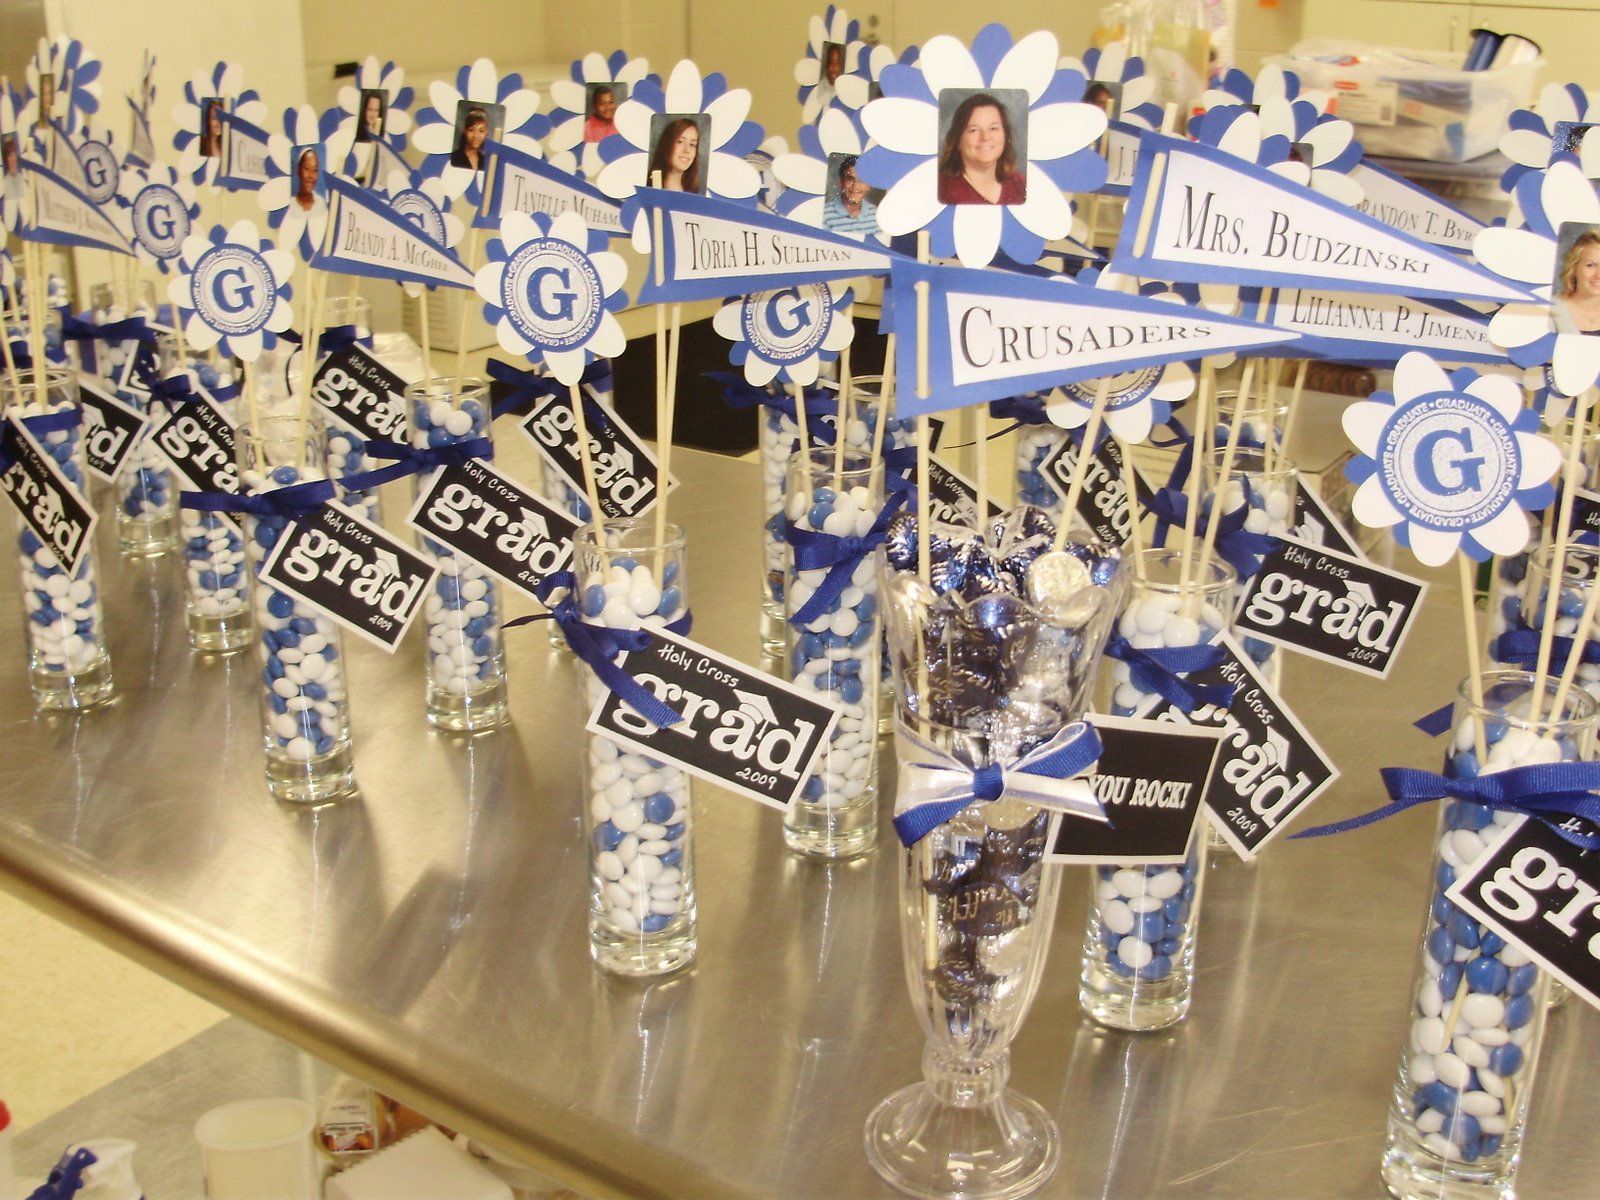 Graduation Party Centerpieces Ideas | Here are some general tips for creating a graduation